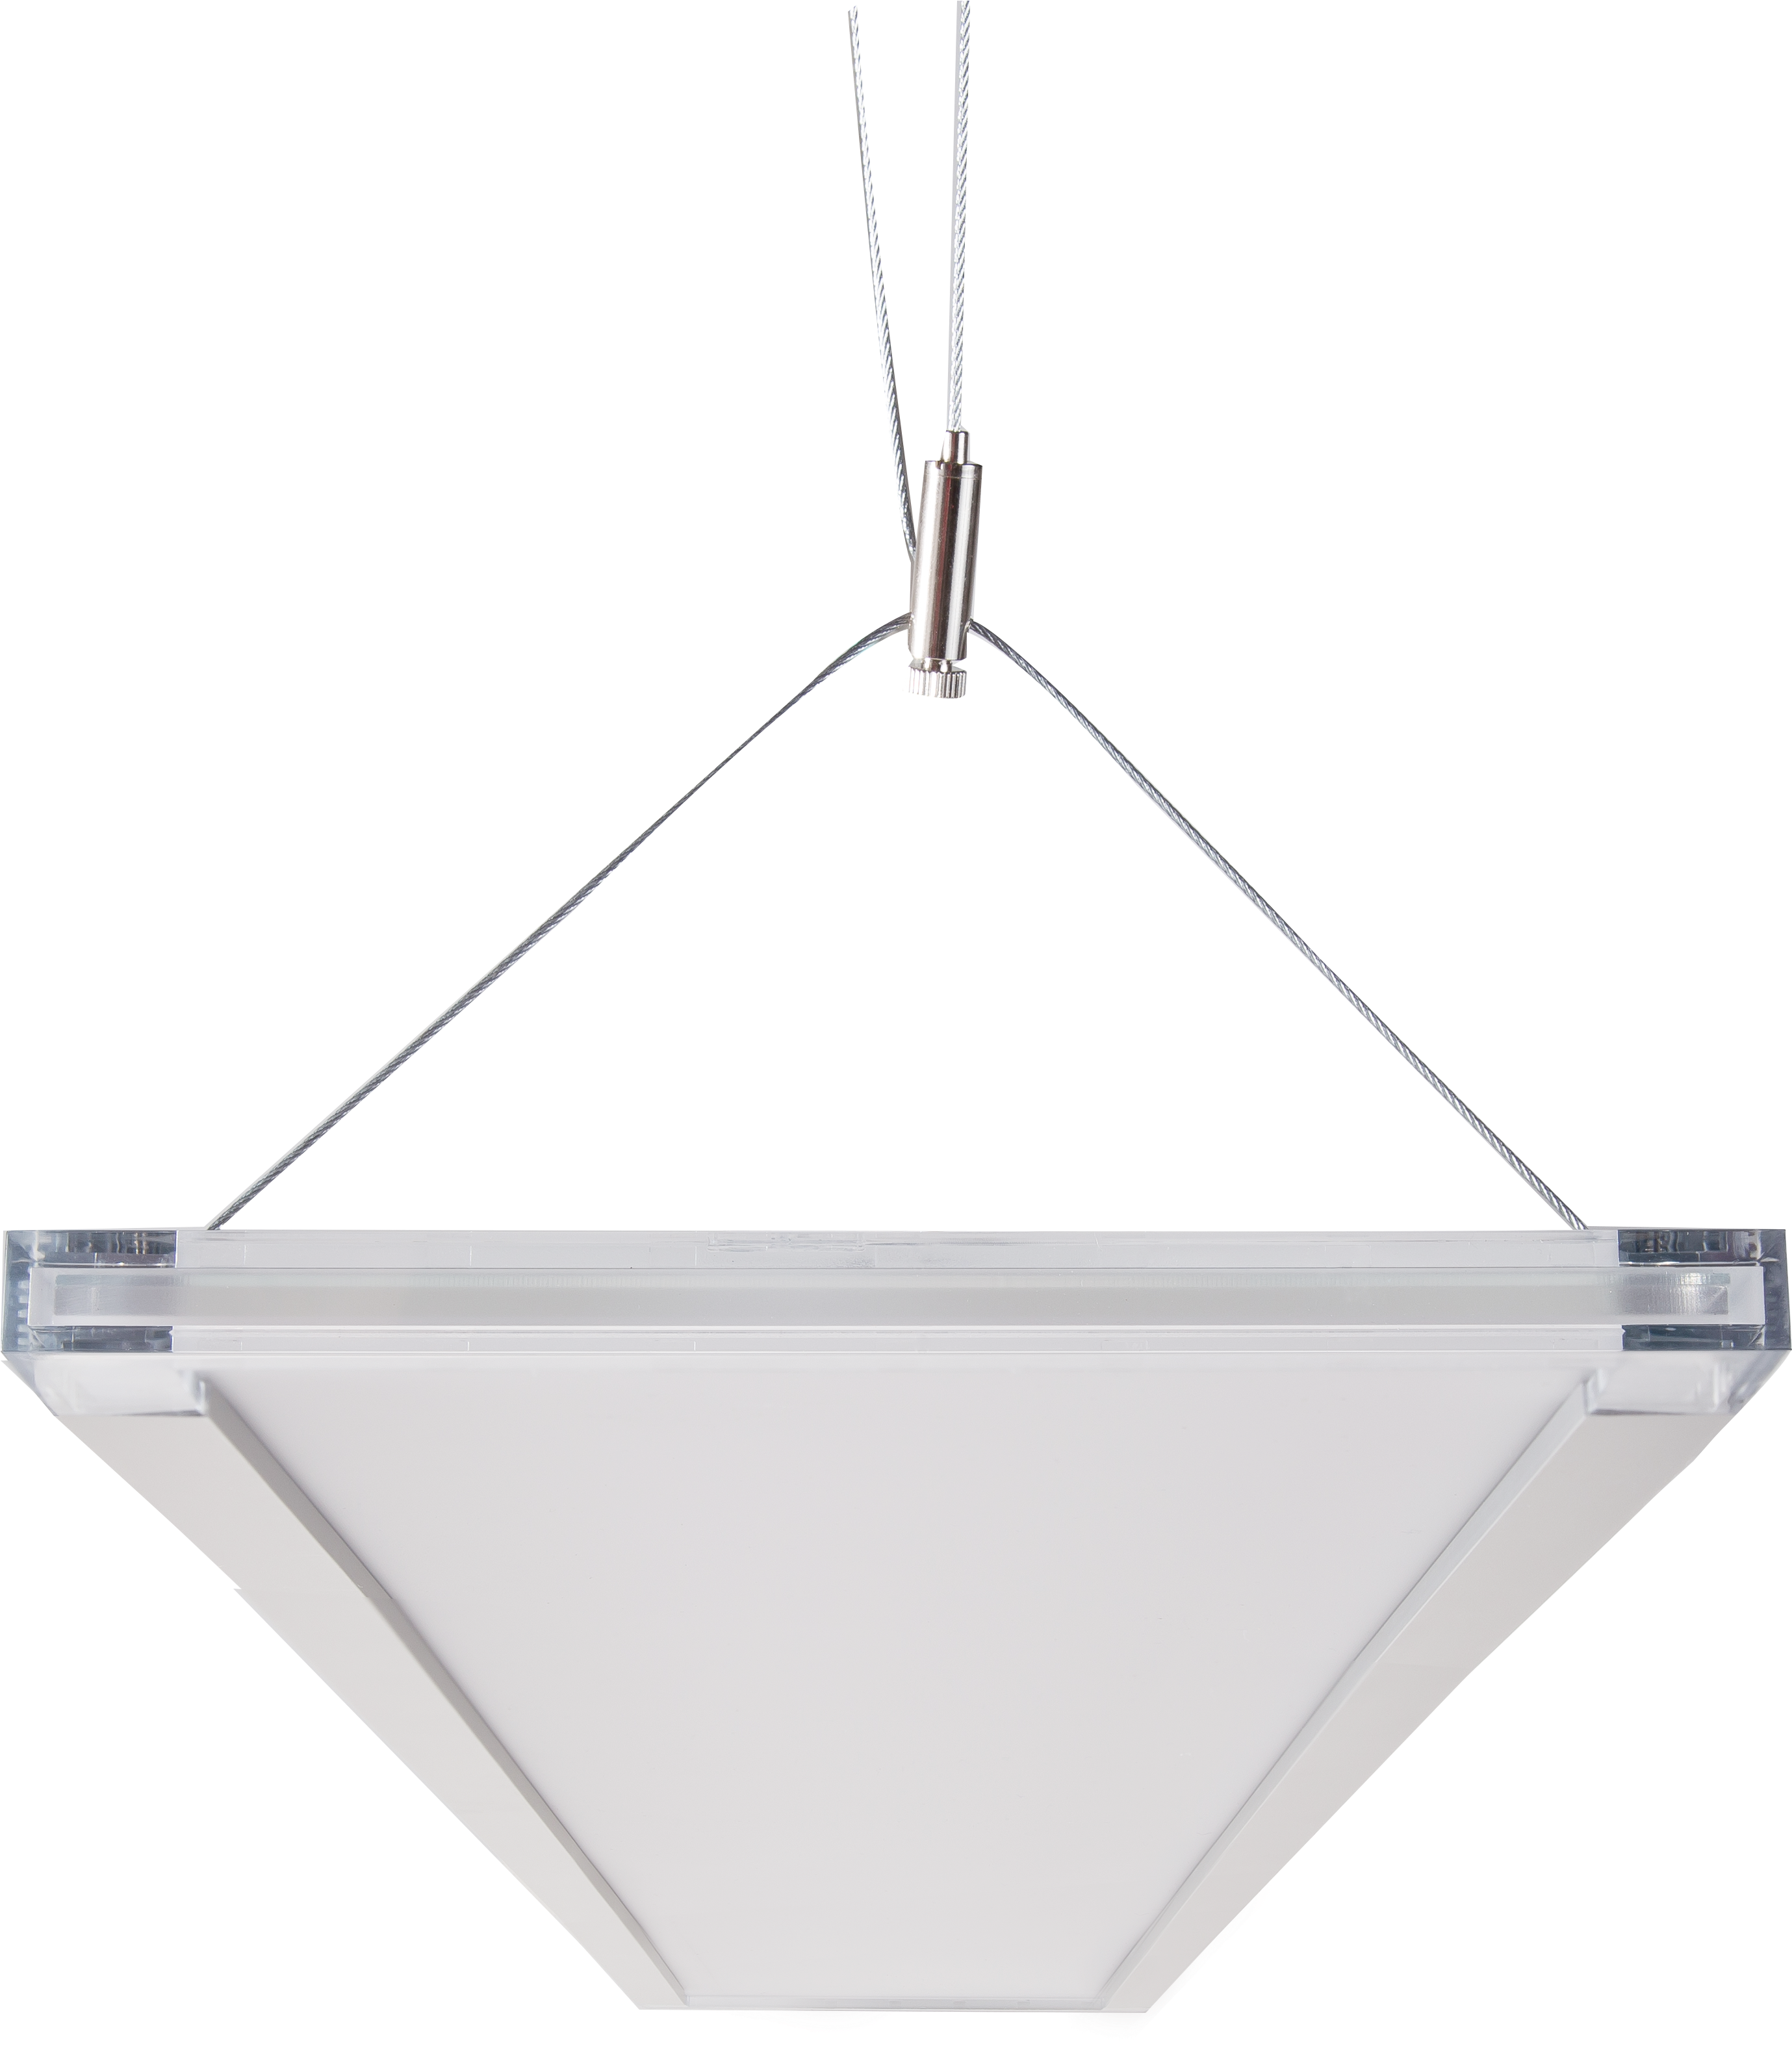 A White Triangle From A Wire